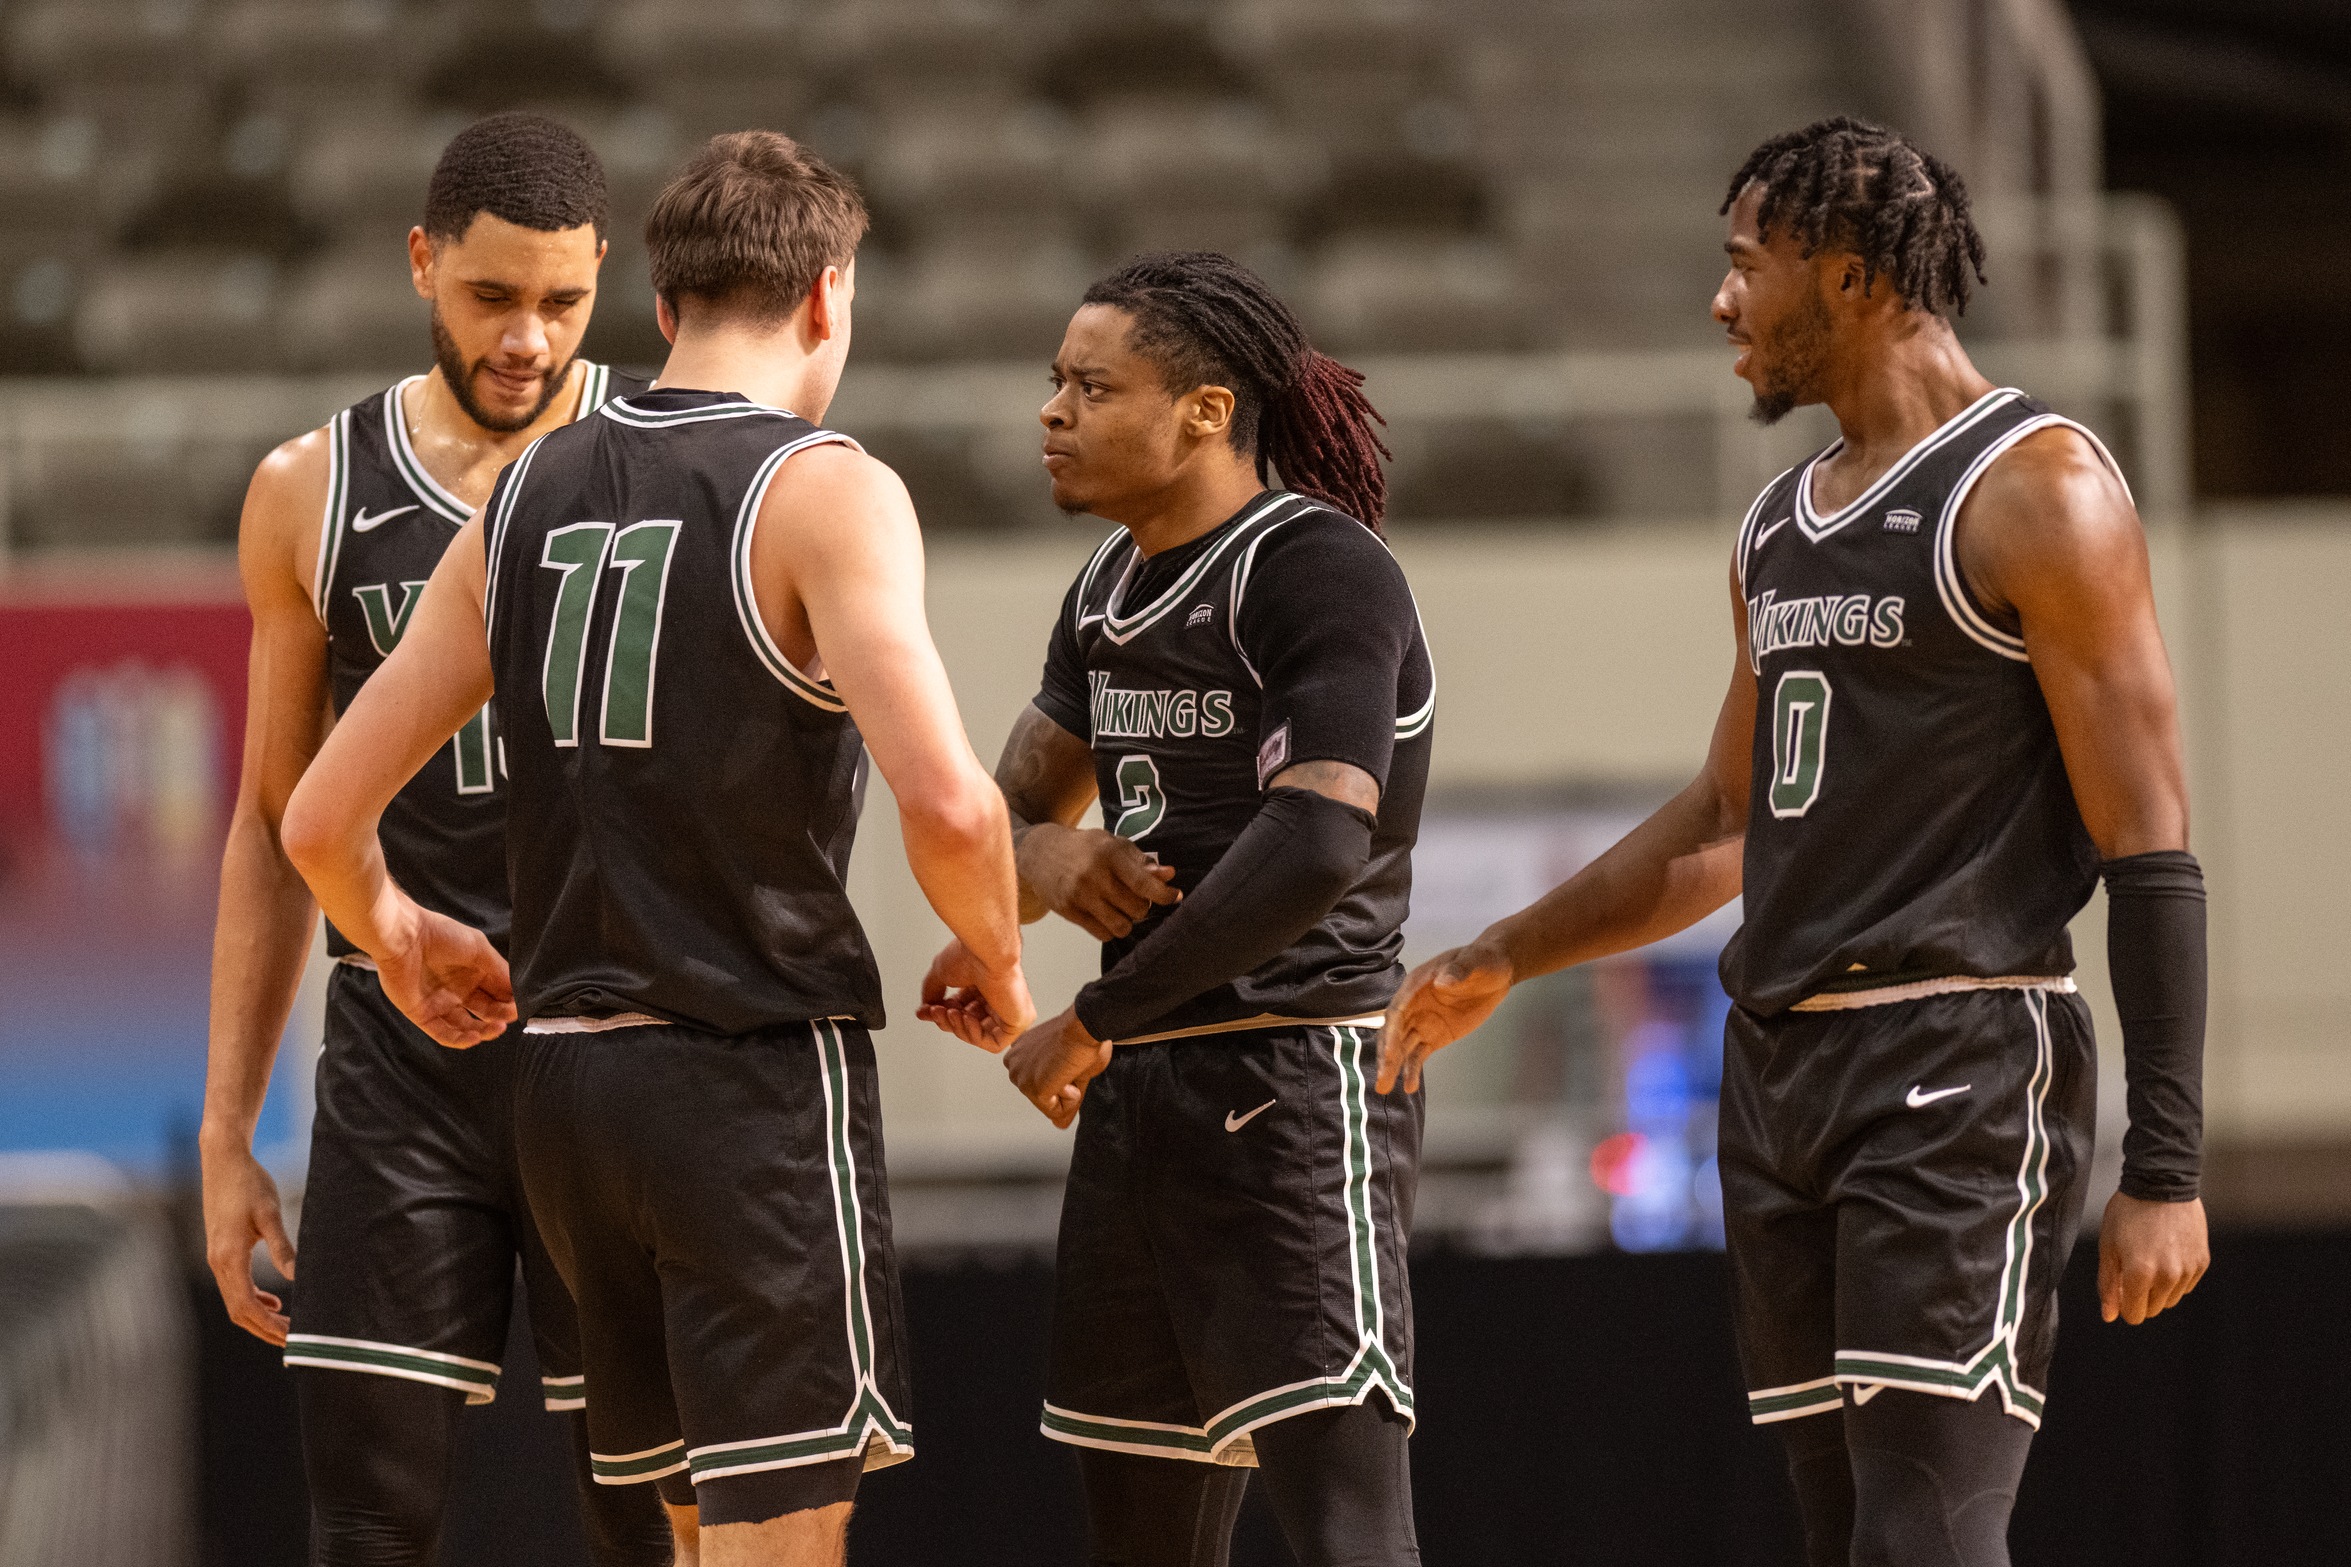 Cleveland State Men’s Basketball Wins Fourth Straight at IUPUI